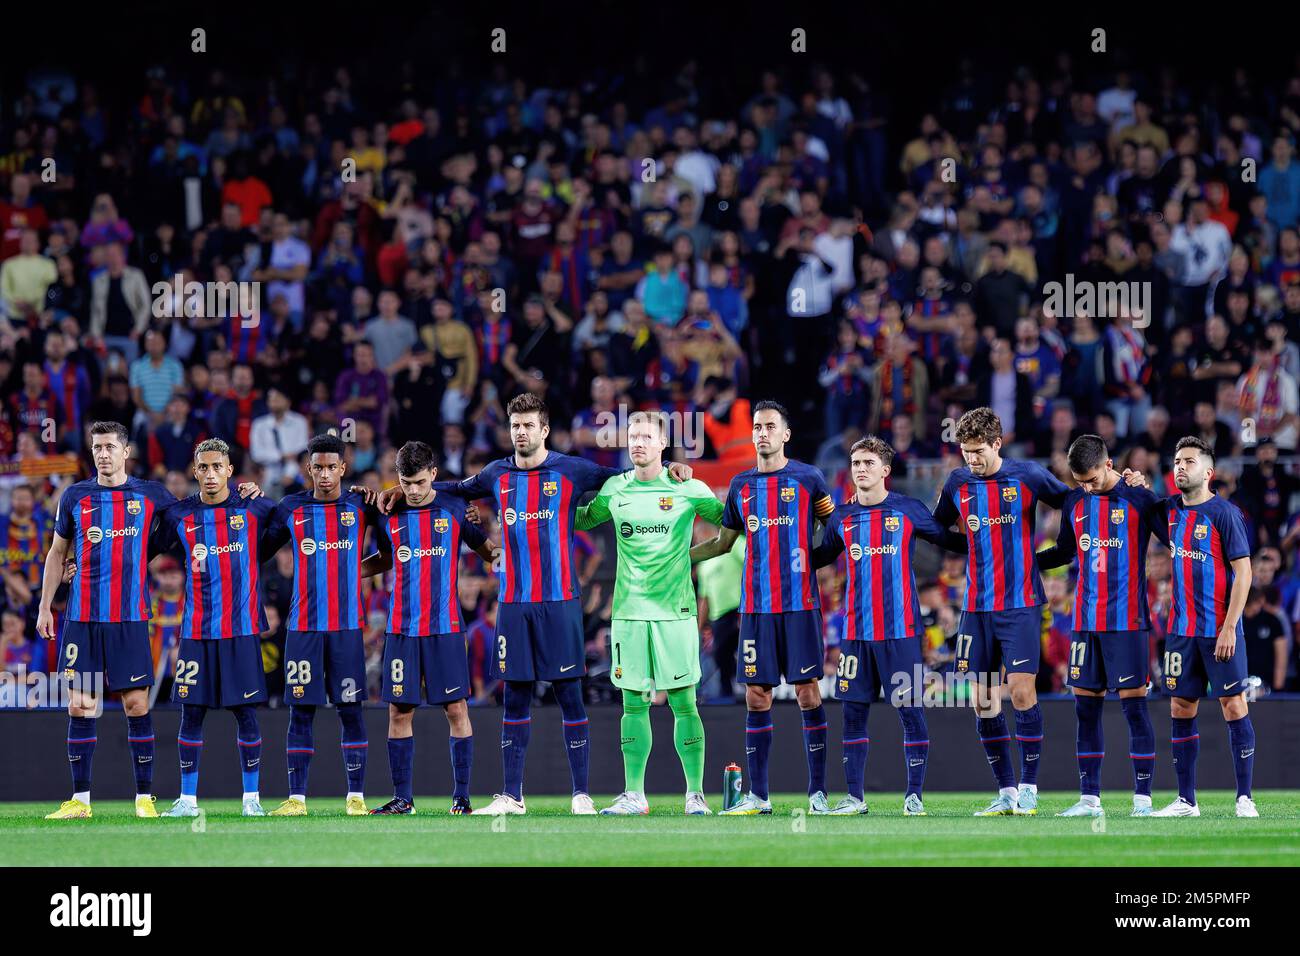 BARCELONA - OCT 9: Barcelona players stand together prior to the LaLiga match between FC Barcelona and RC Celta at the Spotify Camp Nou Stadium on Oct Stock Photo